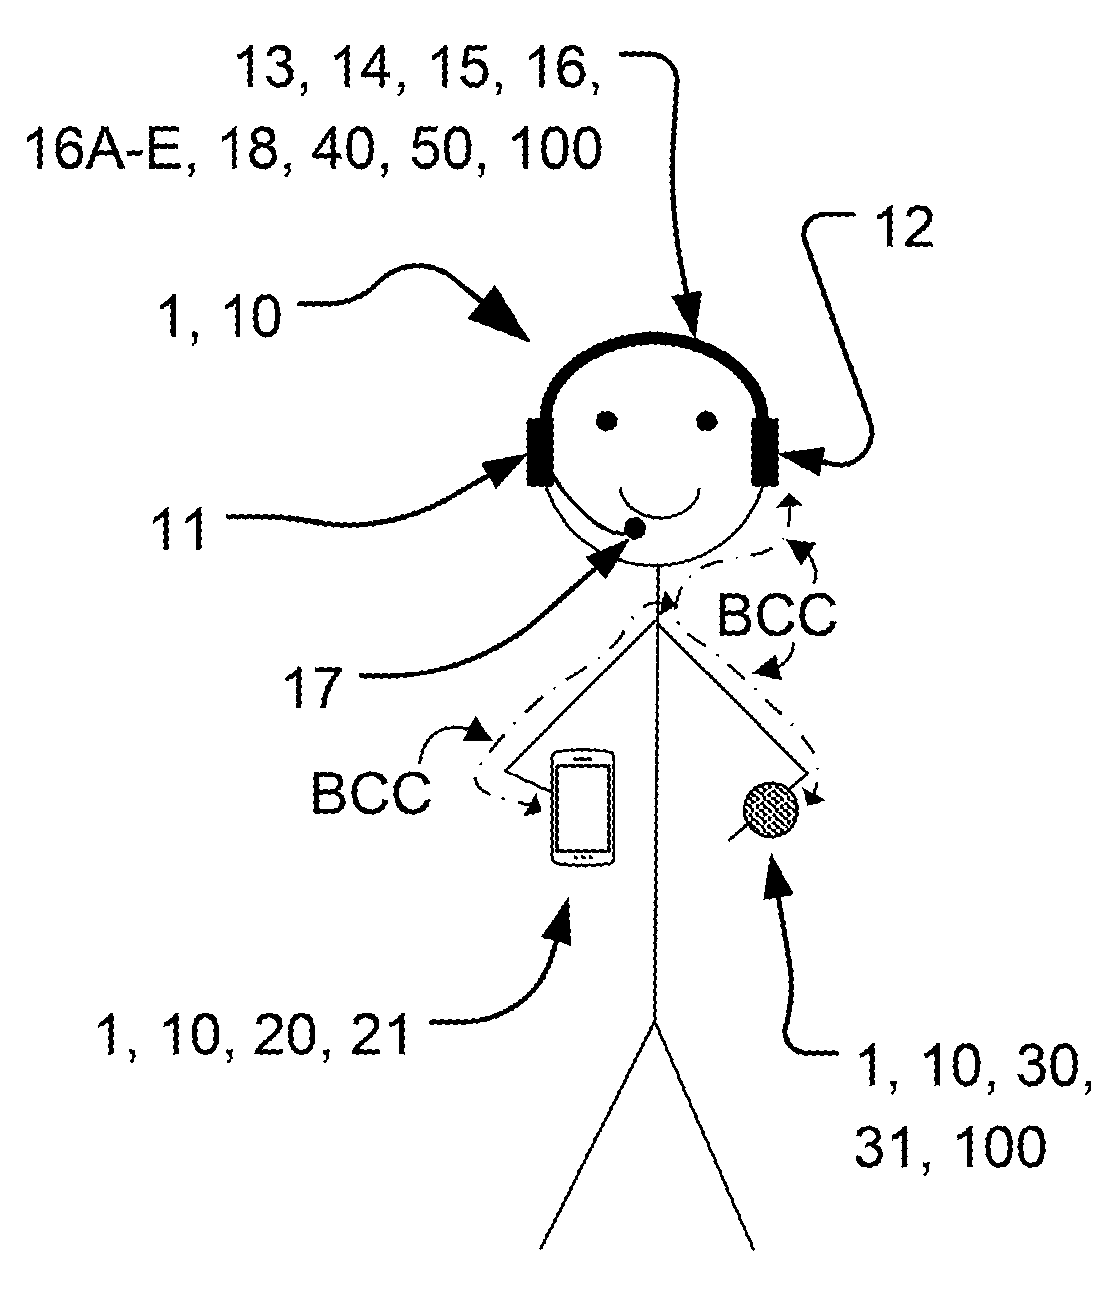 Device for control of data transfer in local area network